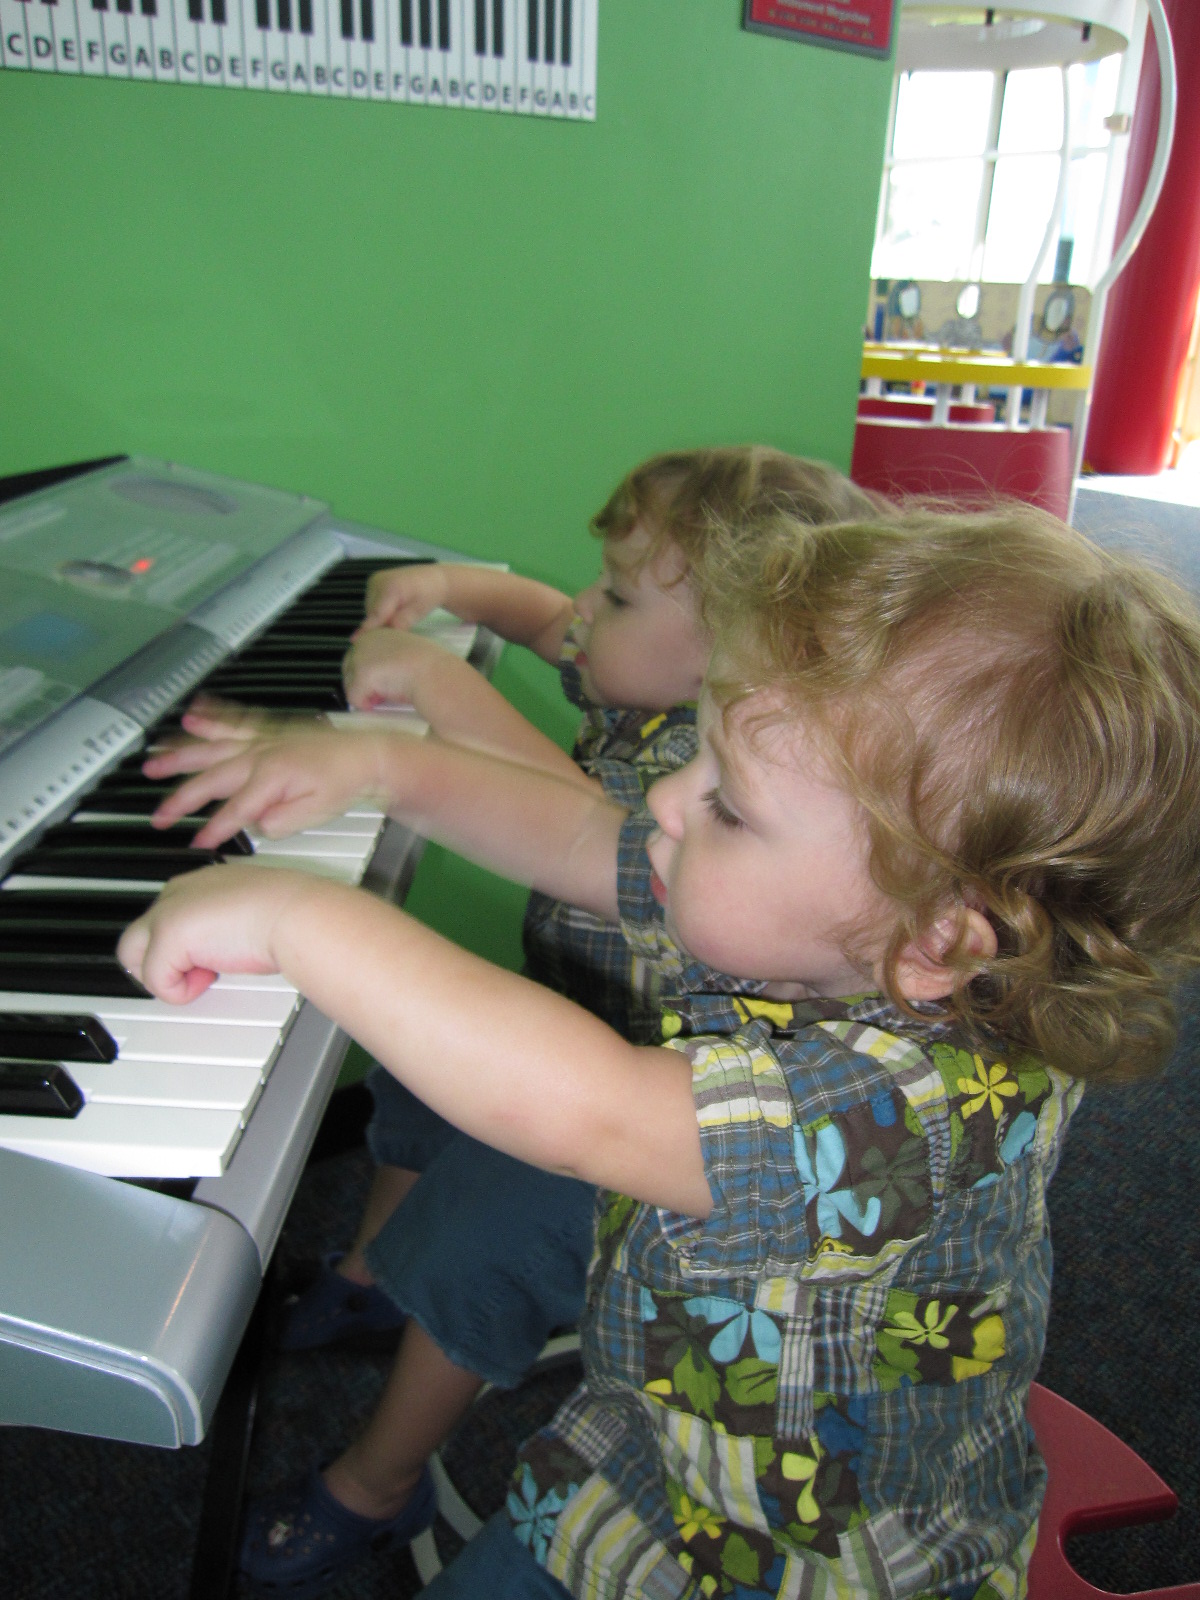 [gnr+play+piano+together.JPG]